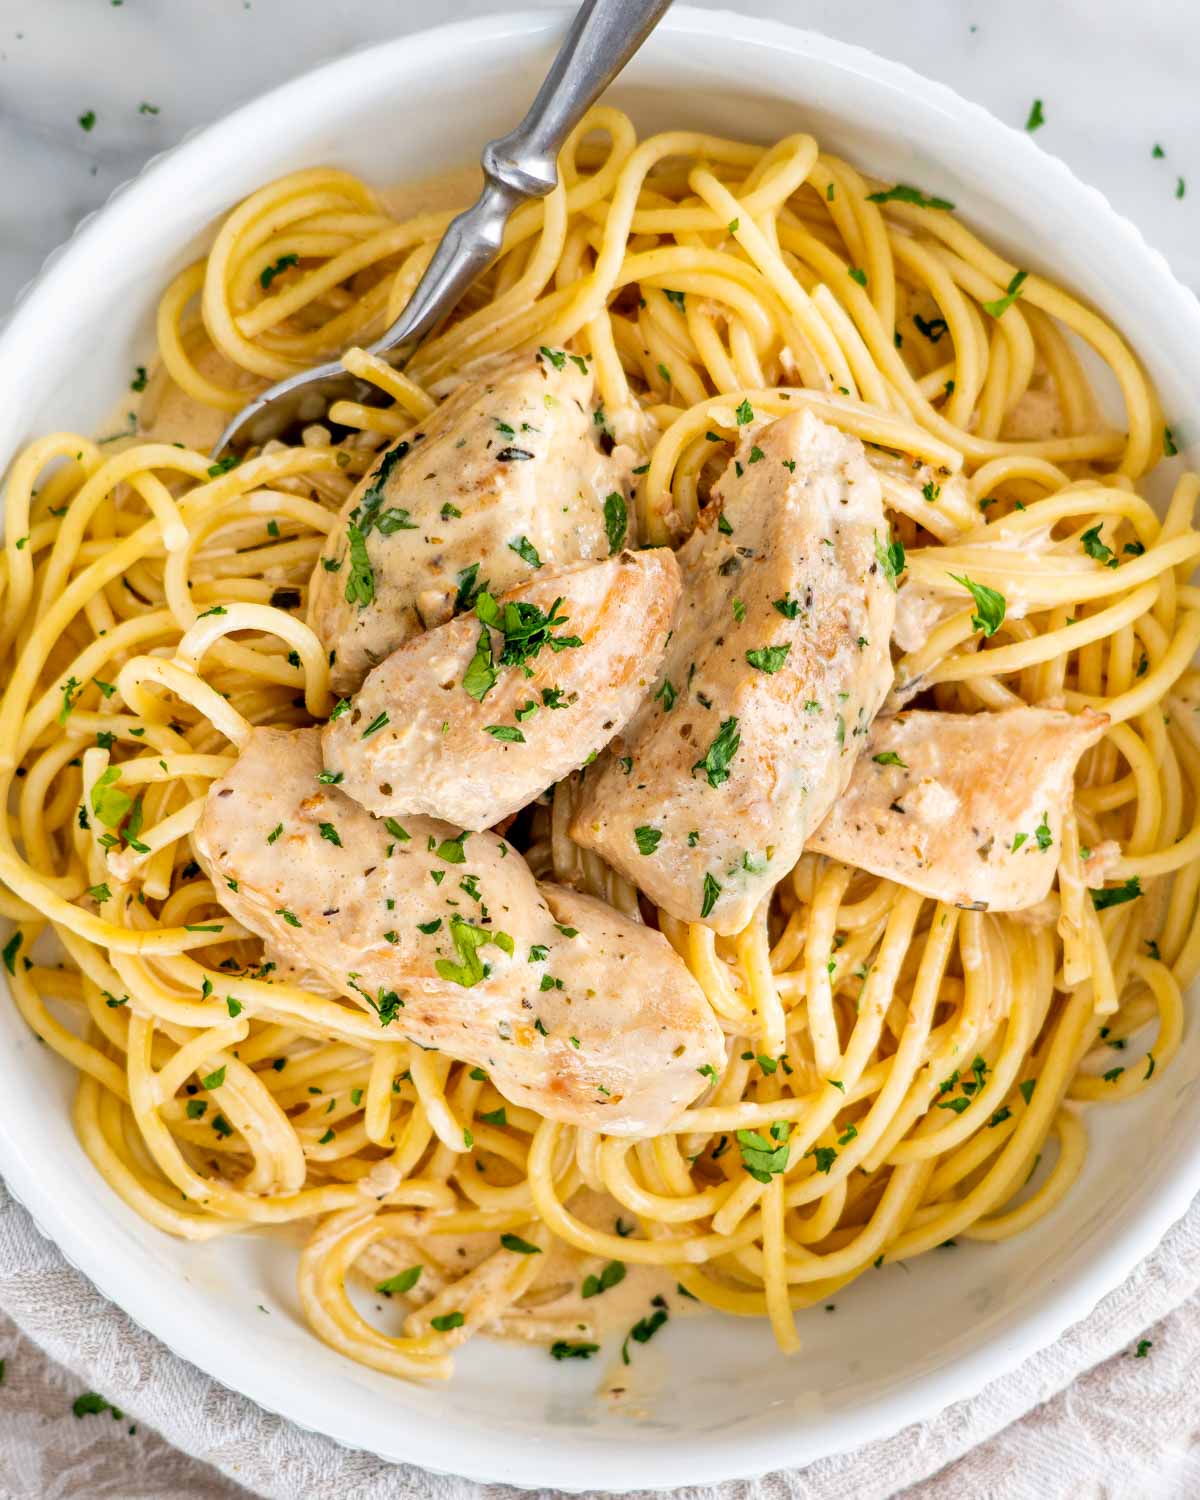 chicken lazone over a bed of spaghetti garnished with parsley.